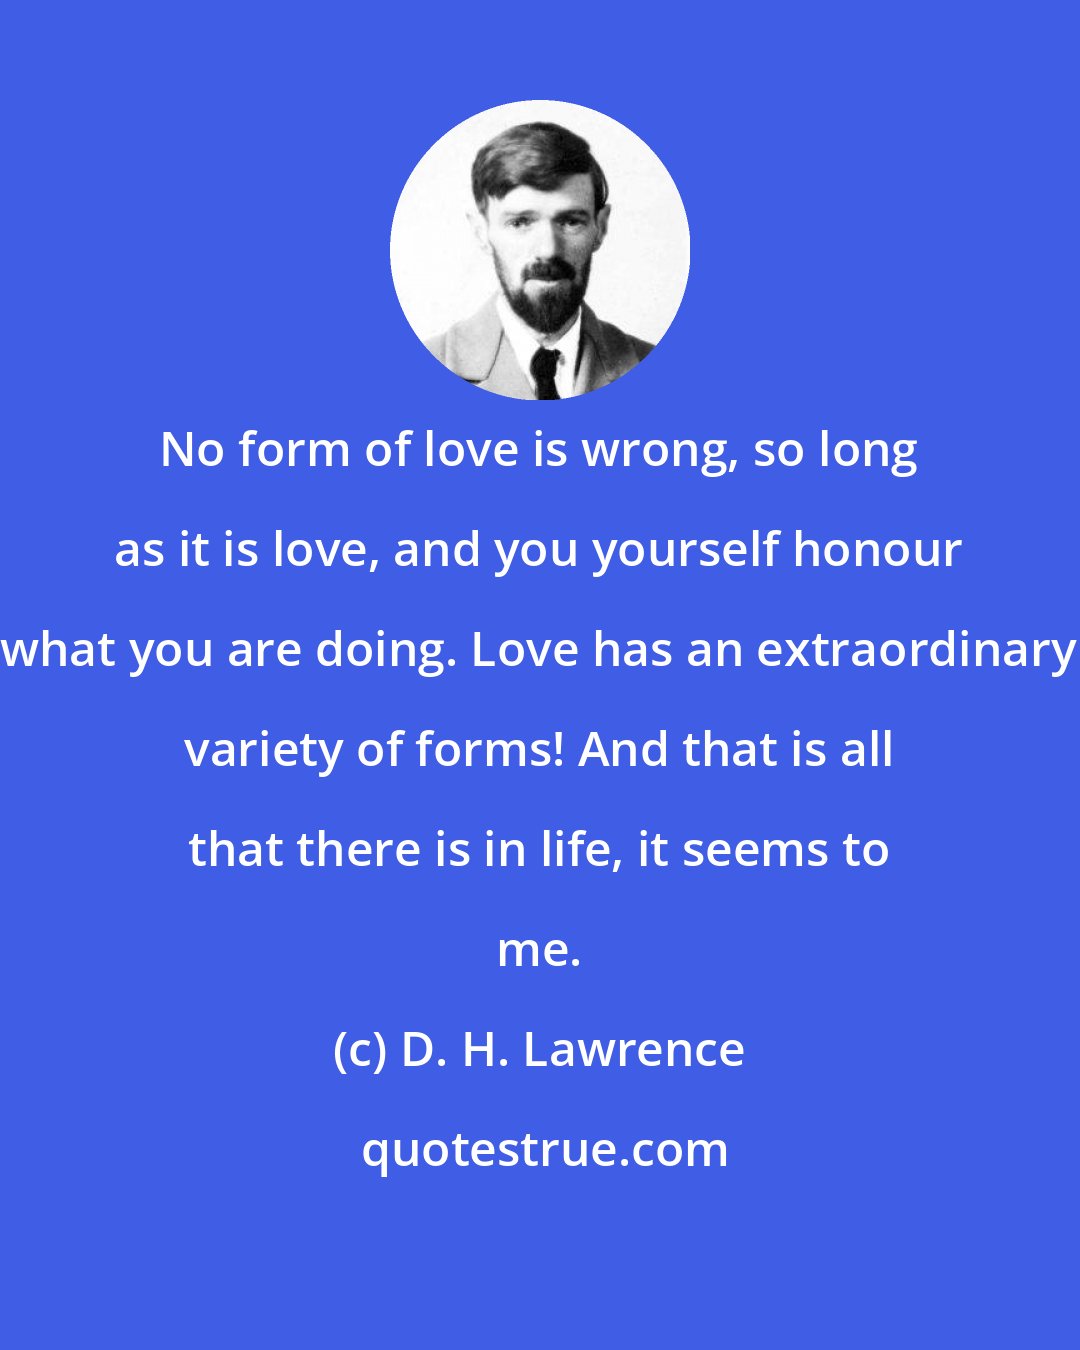 D. H. Lawrence: No form of love is wrong, so long as it is love, and you yourself honour what you are doing. Love has an extraordinary variety of forms! And that is all that there is in life, it seems to me.